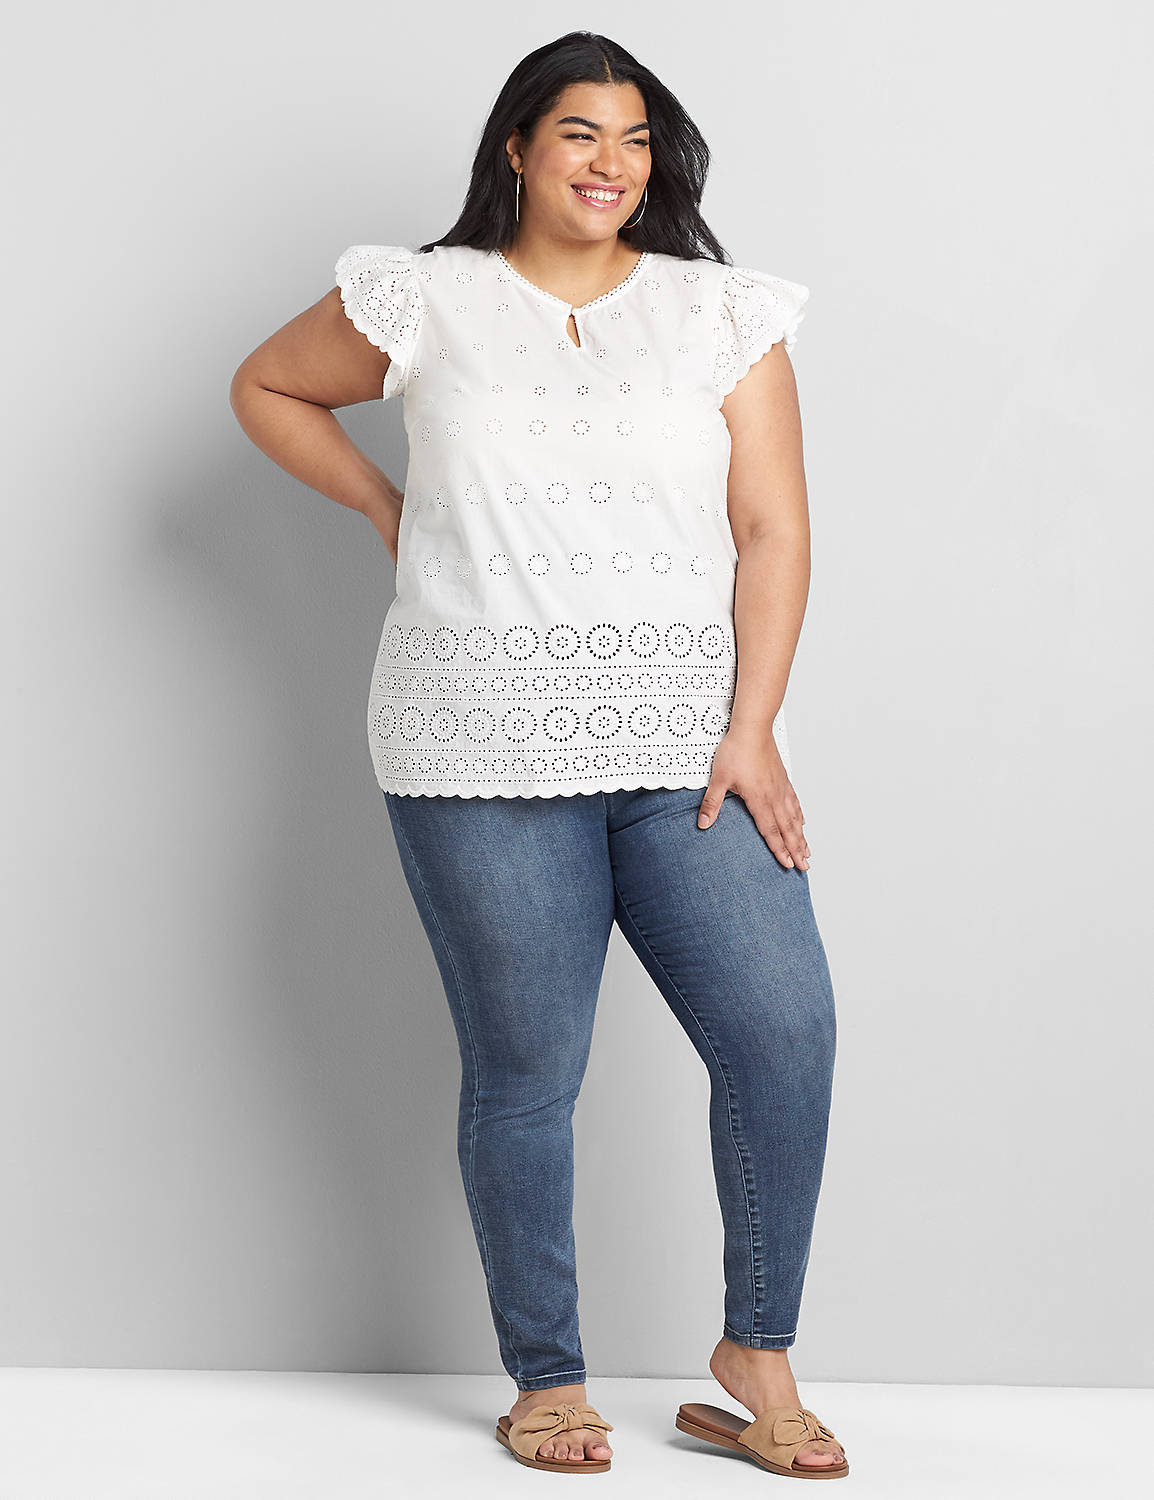 Sleeveless With Crew Neck With Button Keyhole In Eyelet and Knit Back 1119627:Ascena White:38/40 Product Image 3